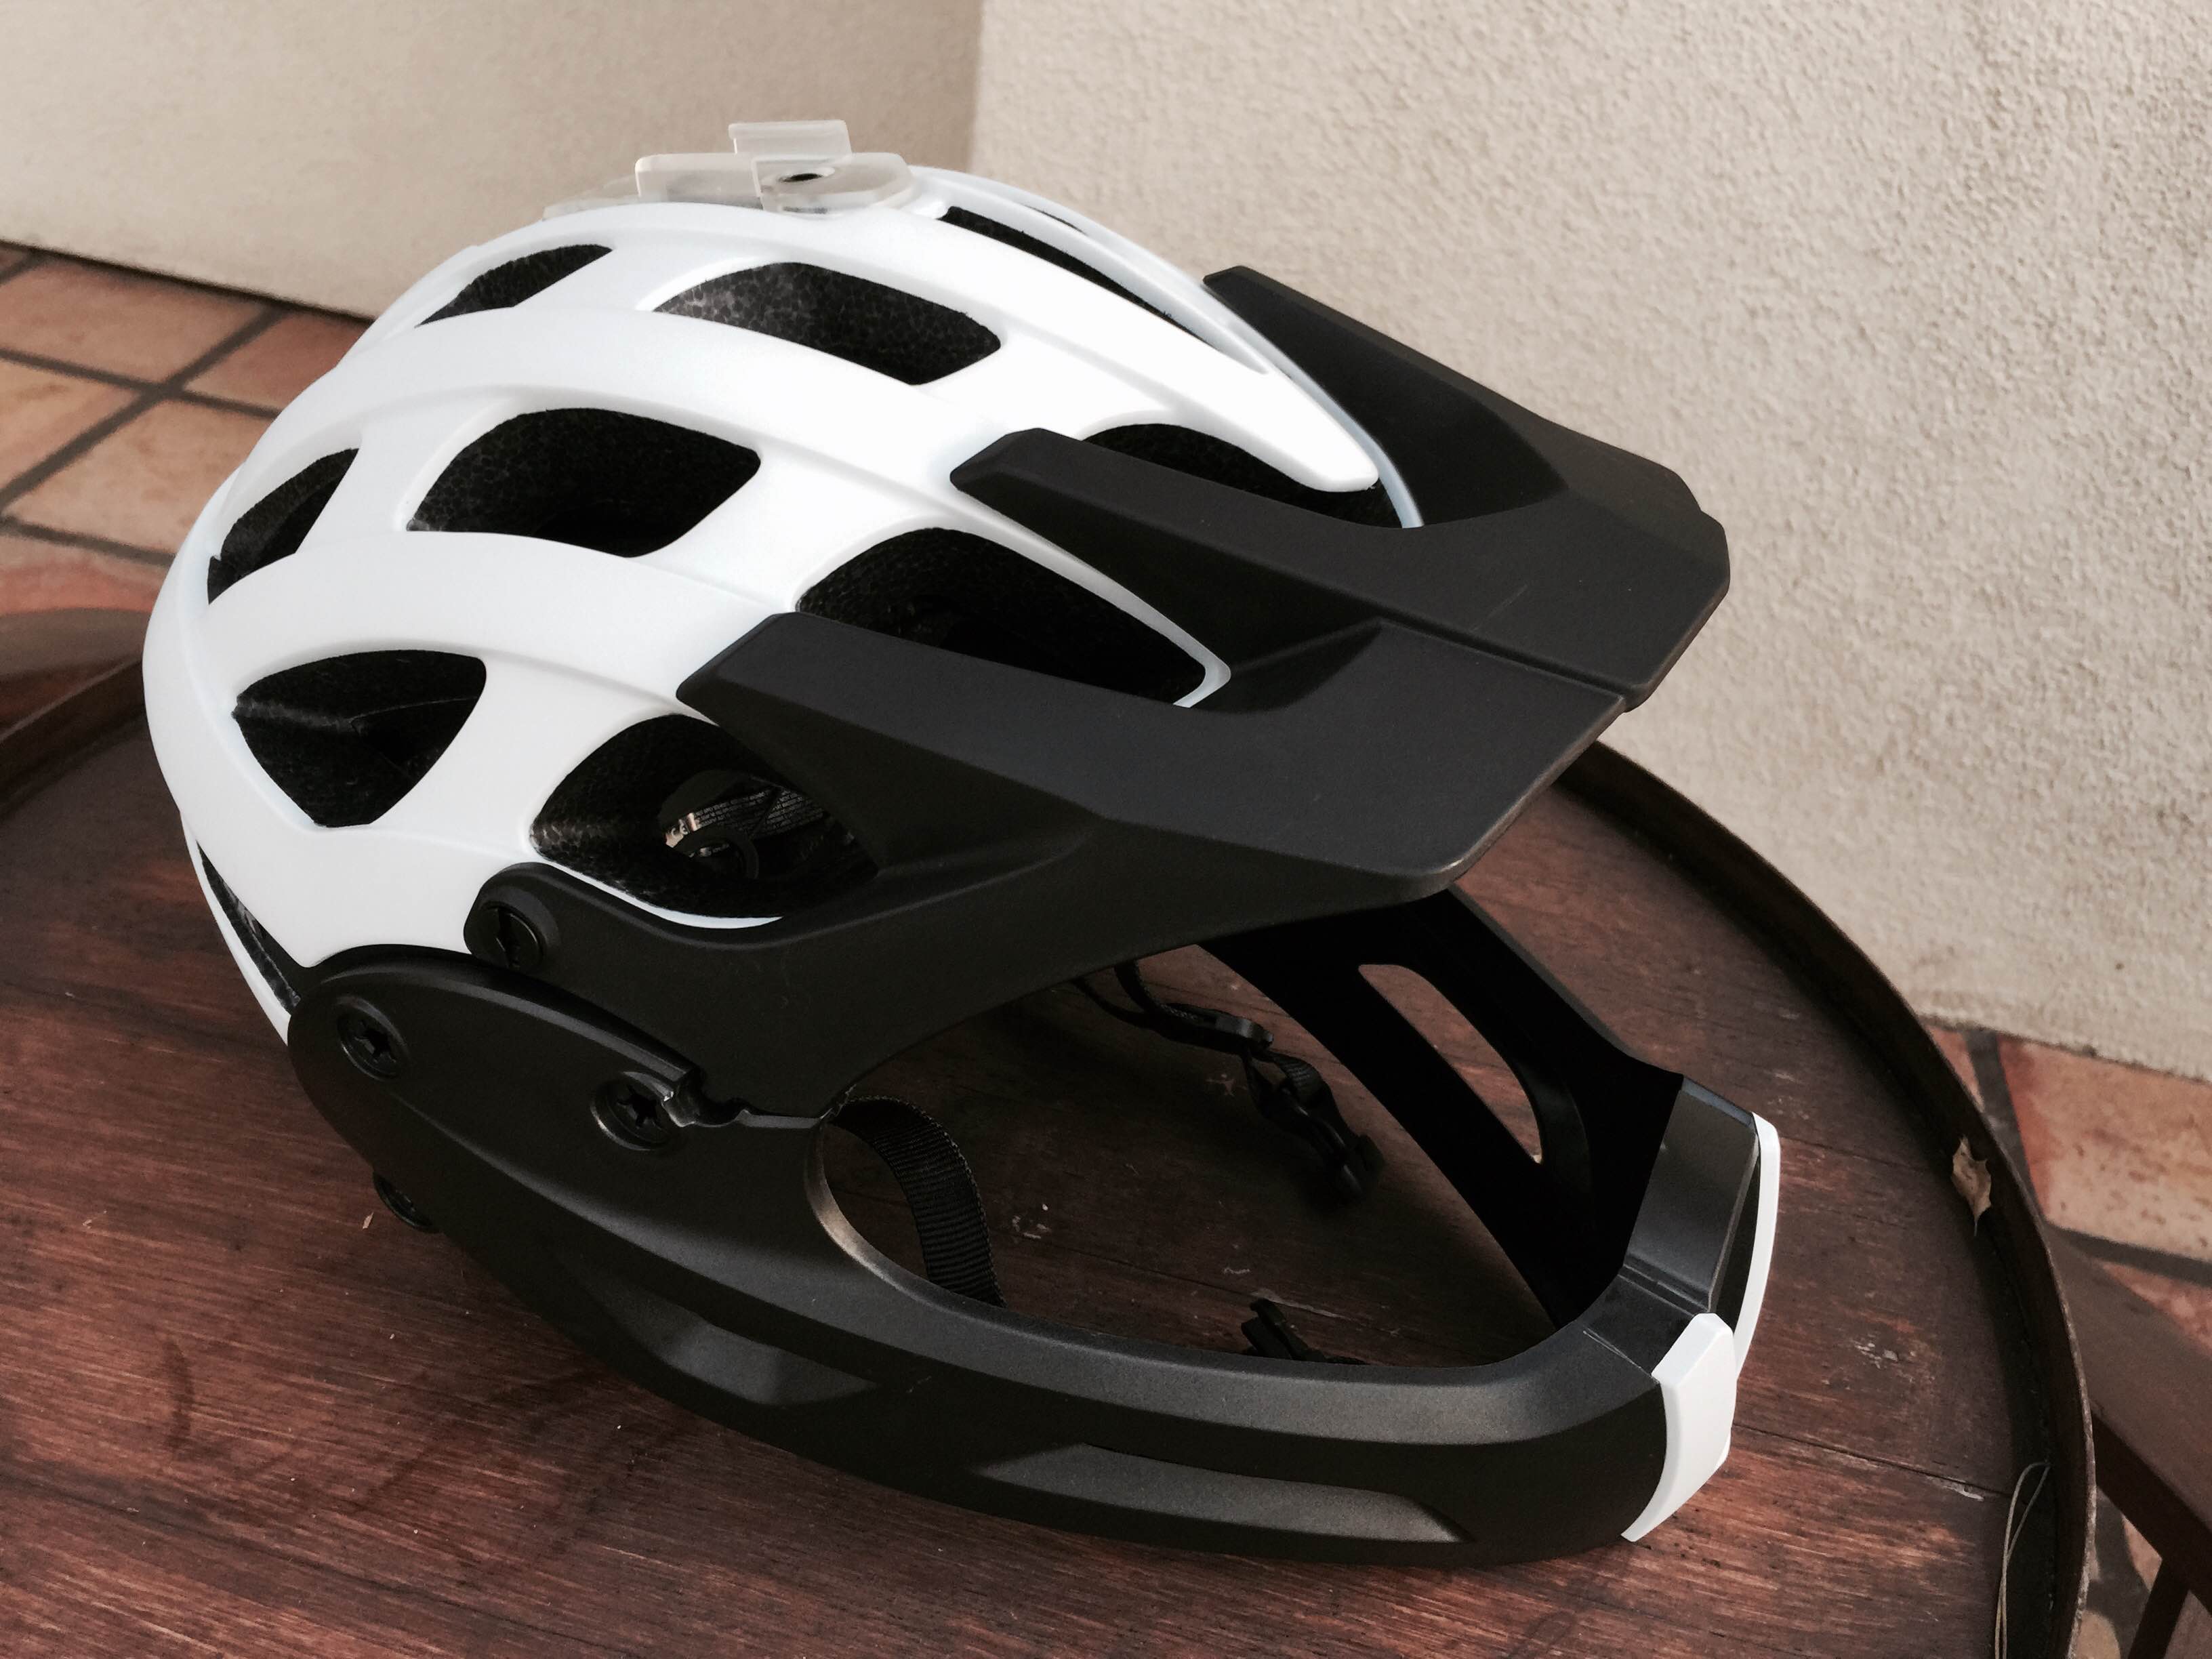 Lazer's upcoming Revolution enduro helmet will soon get an optional chin guard for full-face protection.